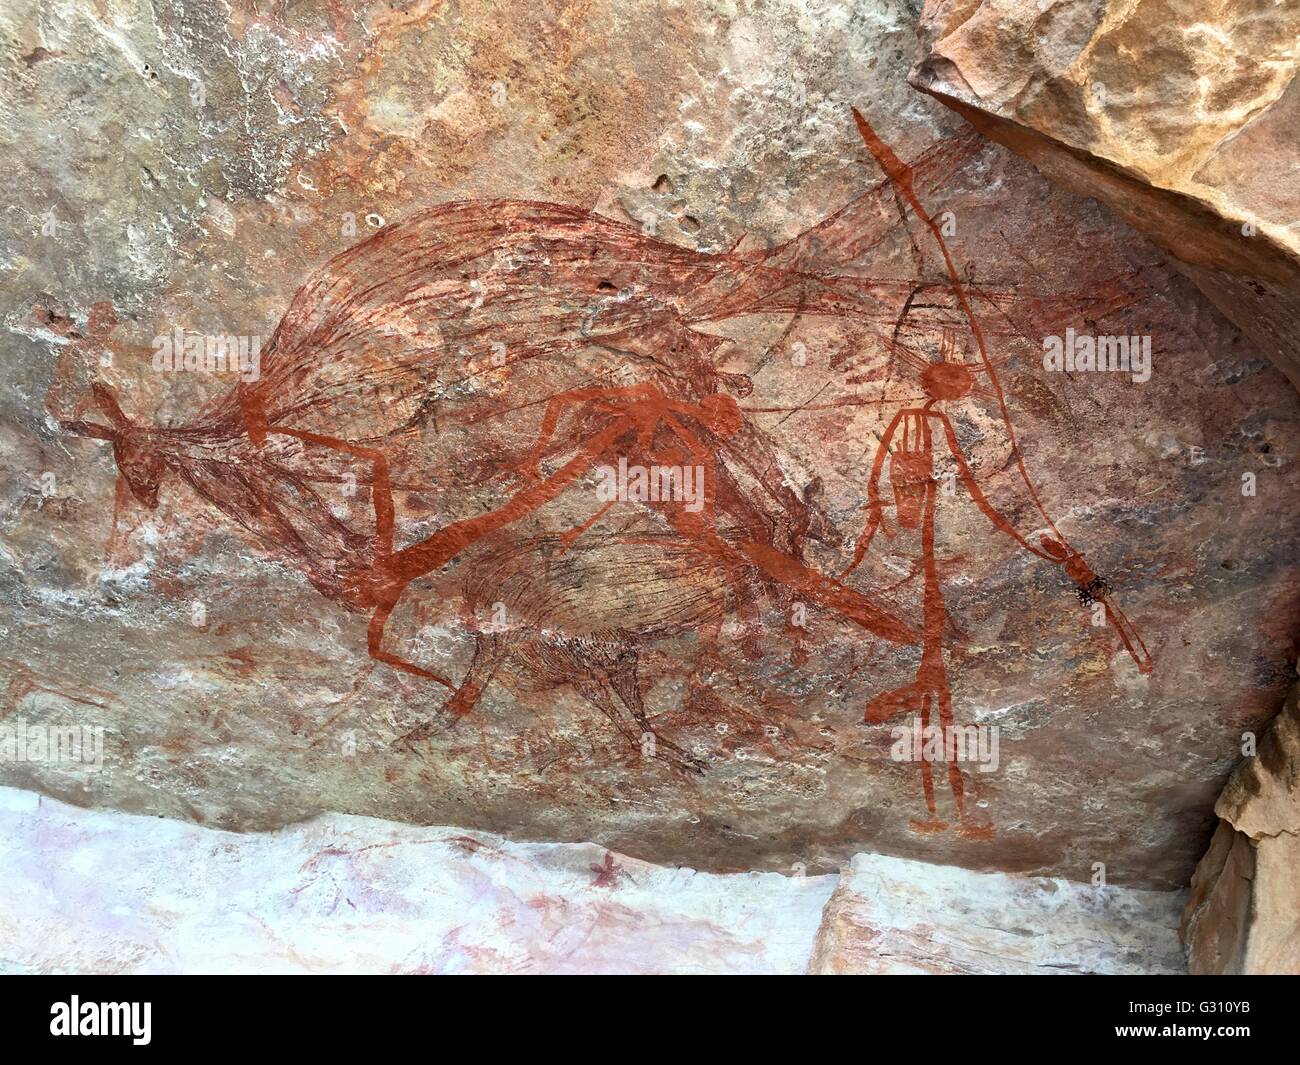 A rock wallaby with human figures painted in a cave at 'The Castle' at Gubara in Kakadu National Park, Australia. Stock Photo